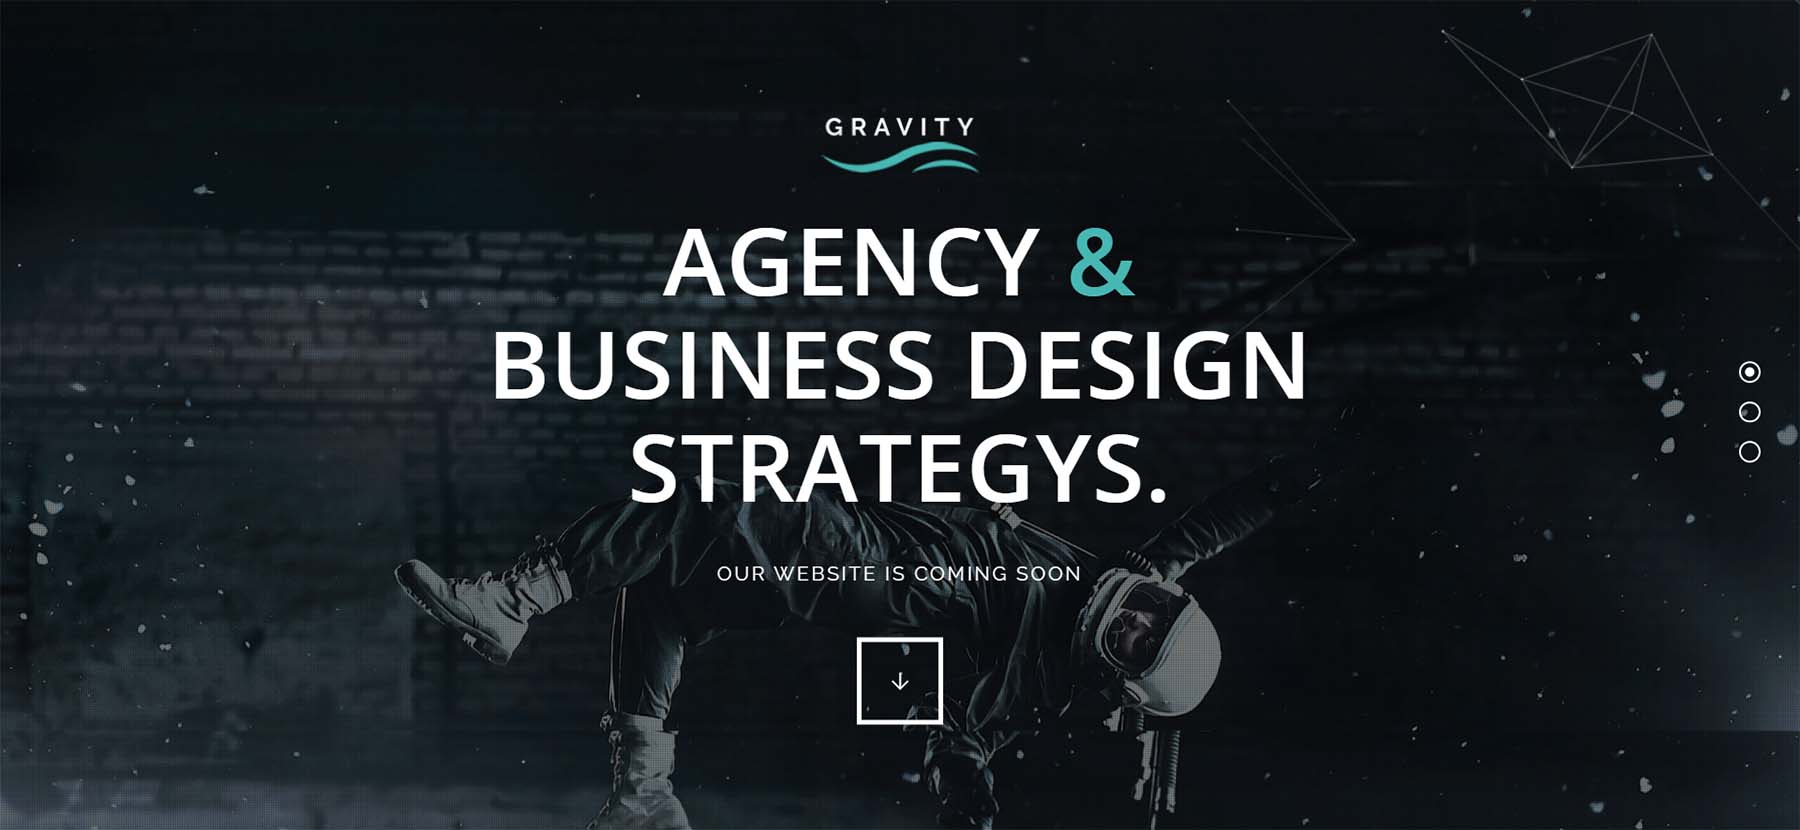 Gravity, one of the best Coming Soon WordPress themes